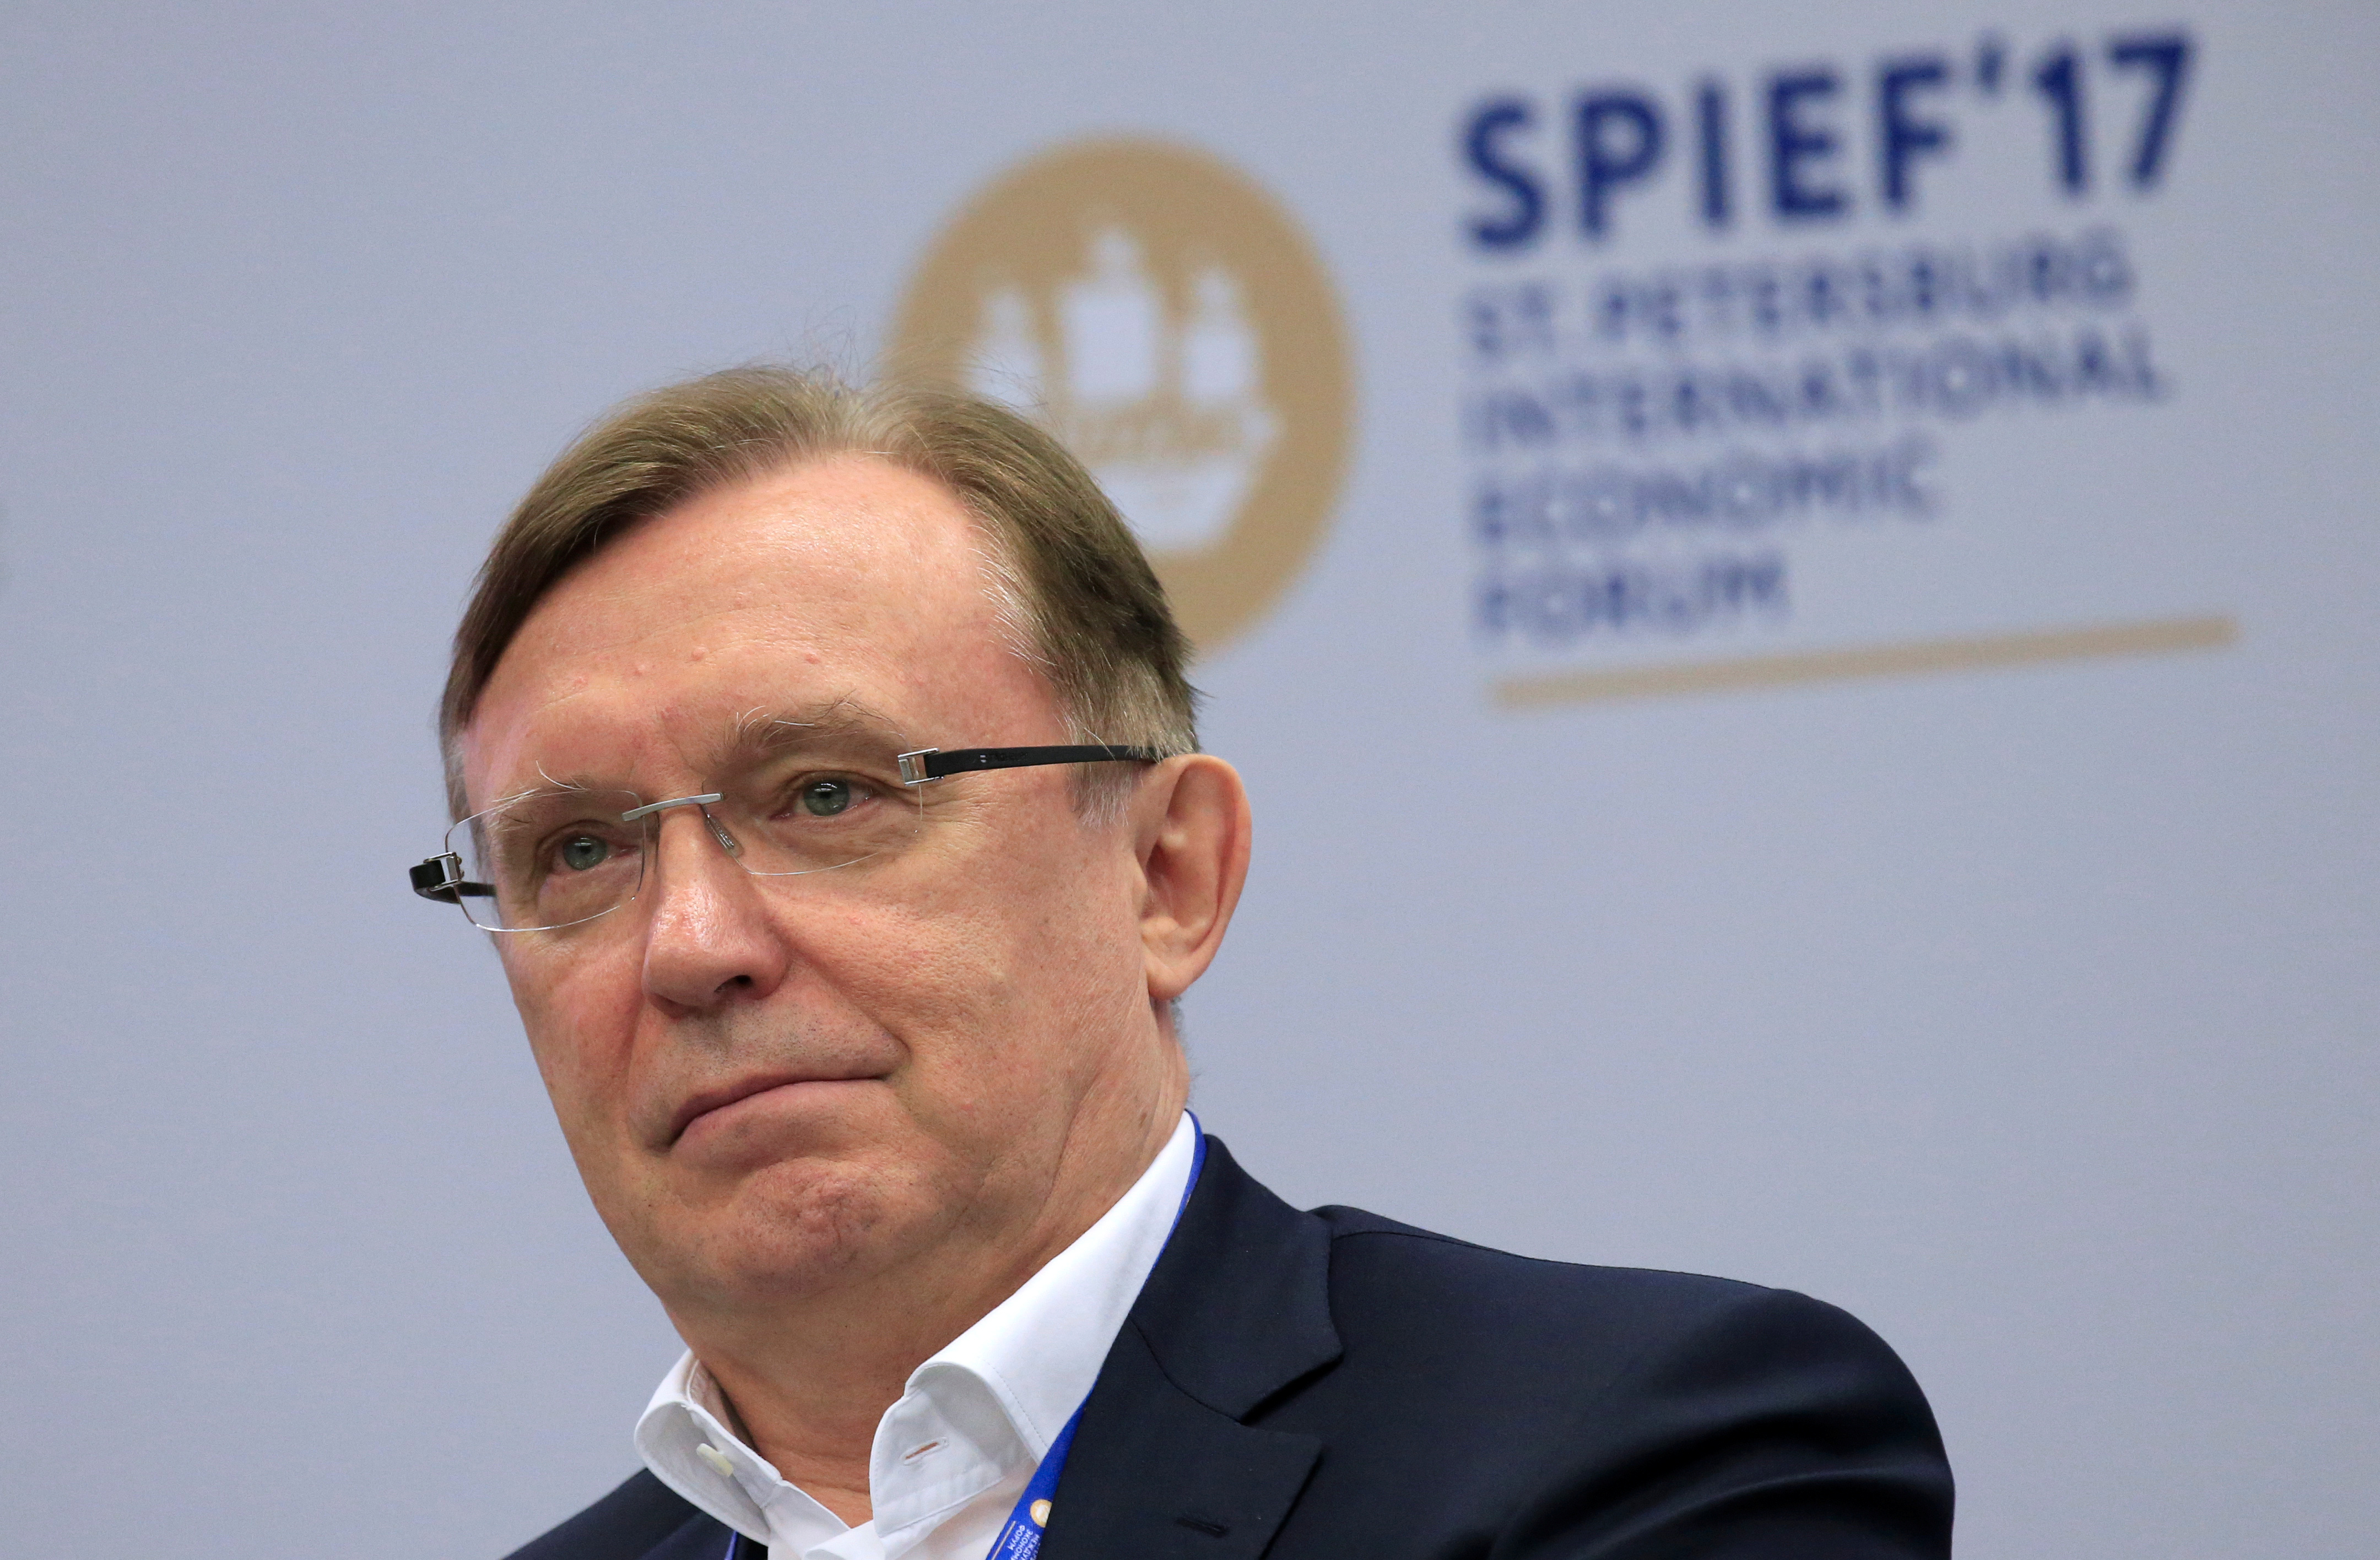 Kamaz's CEO Kogogin attends a session of the St. Petersburg International Economic Forum